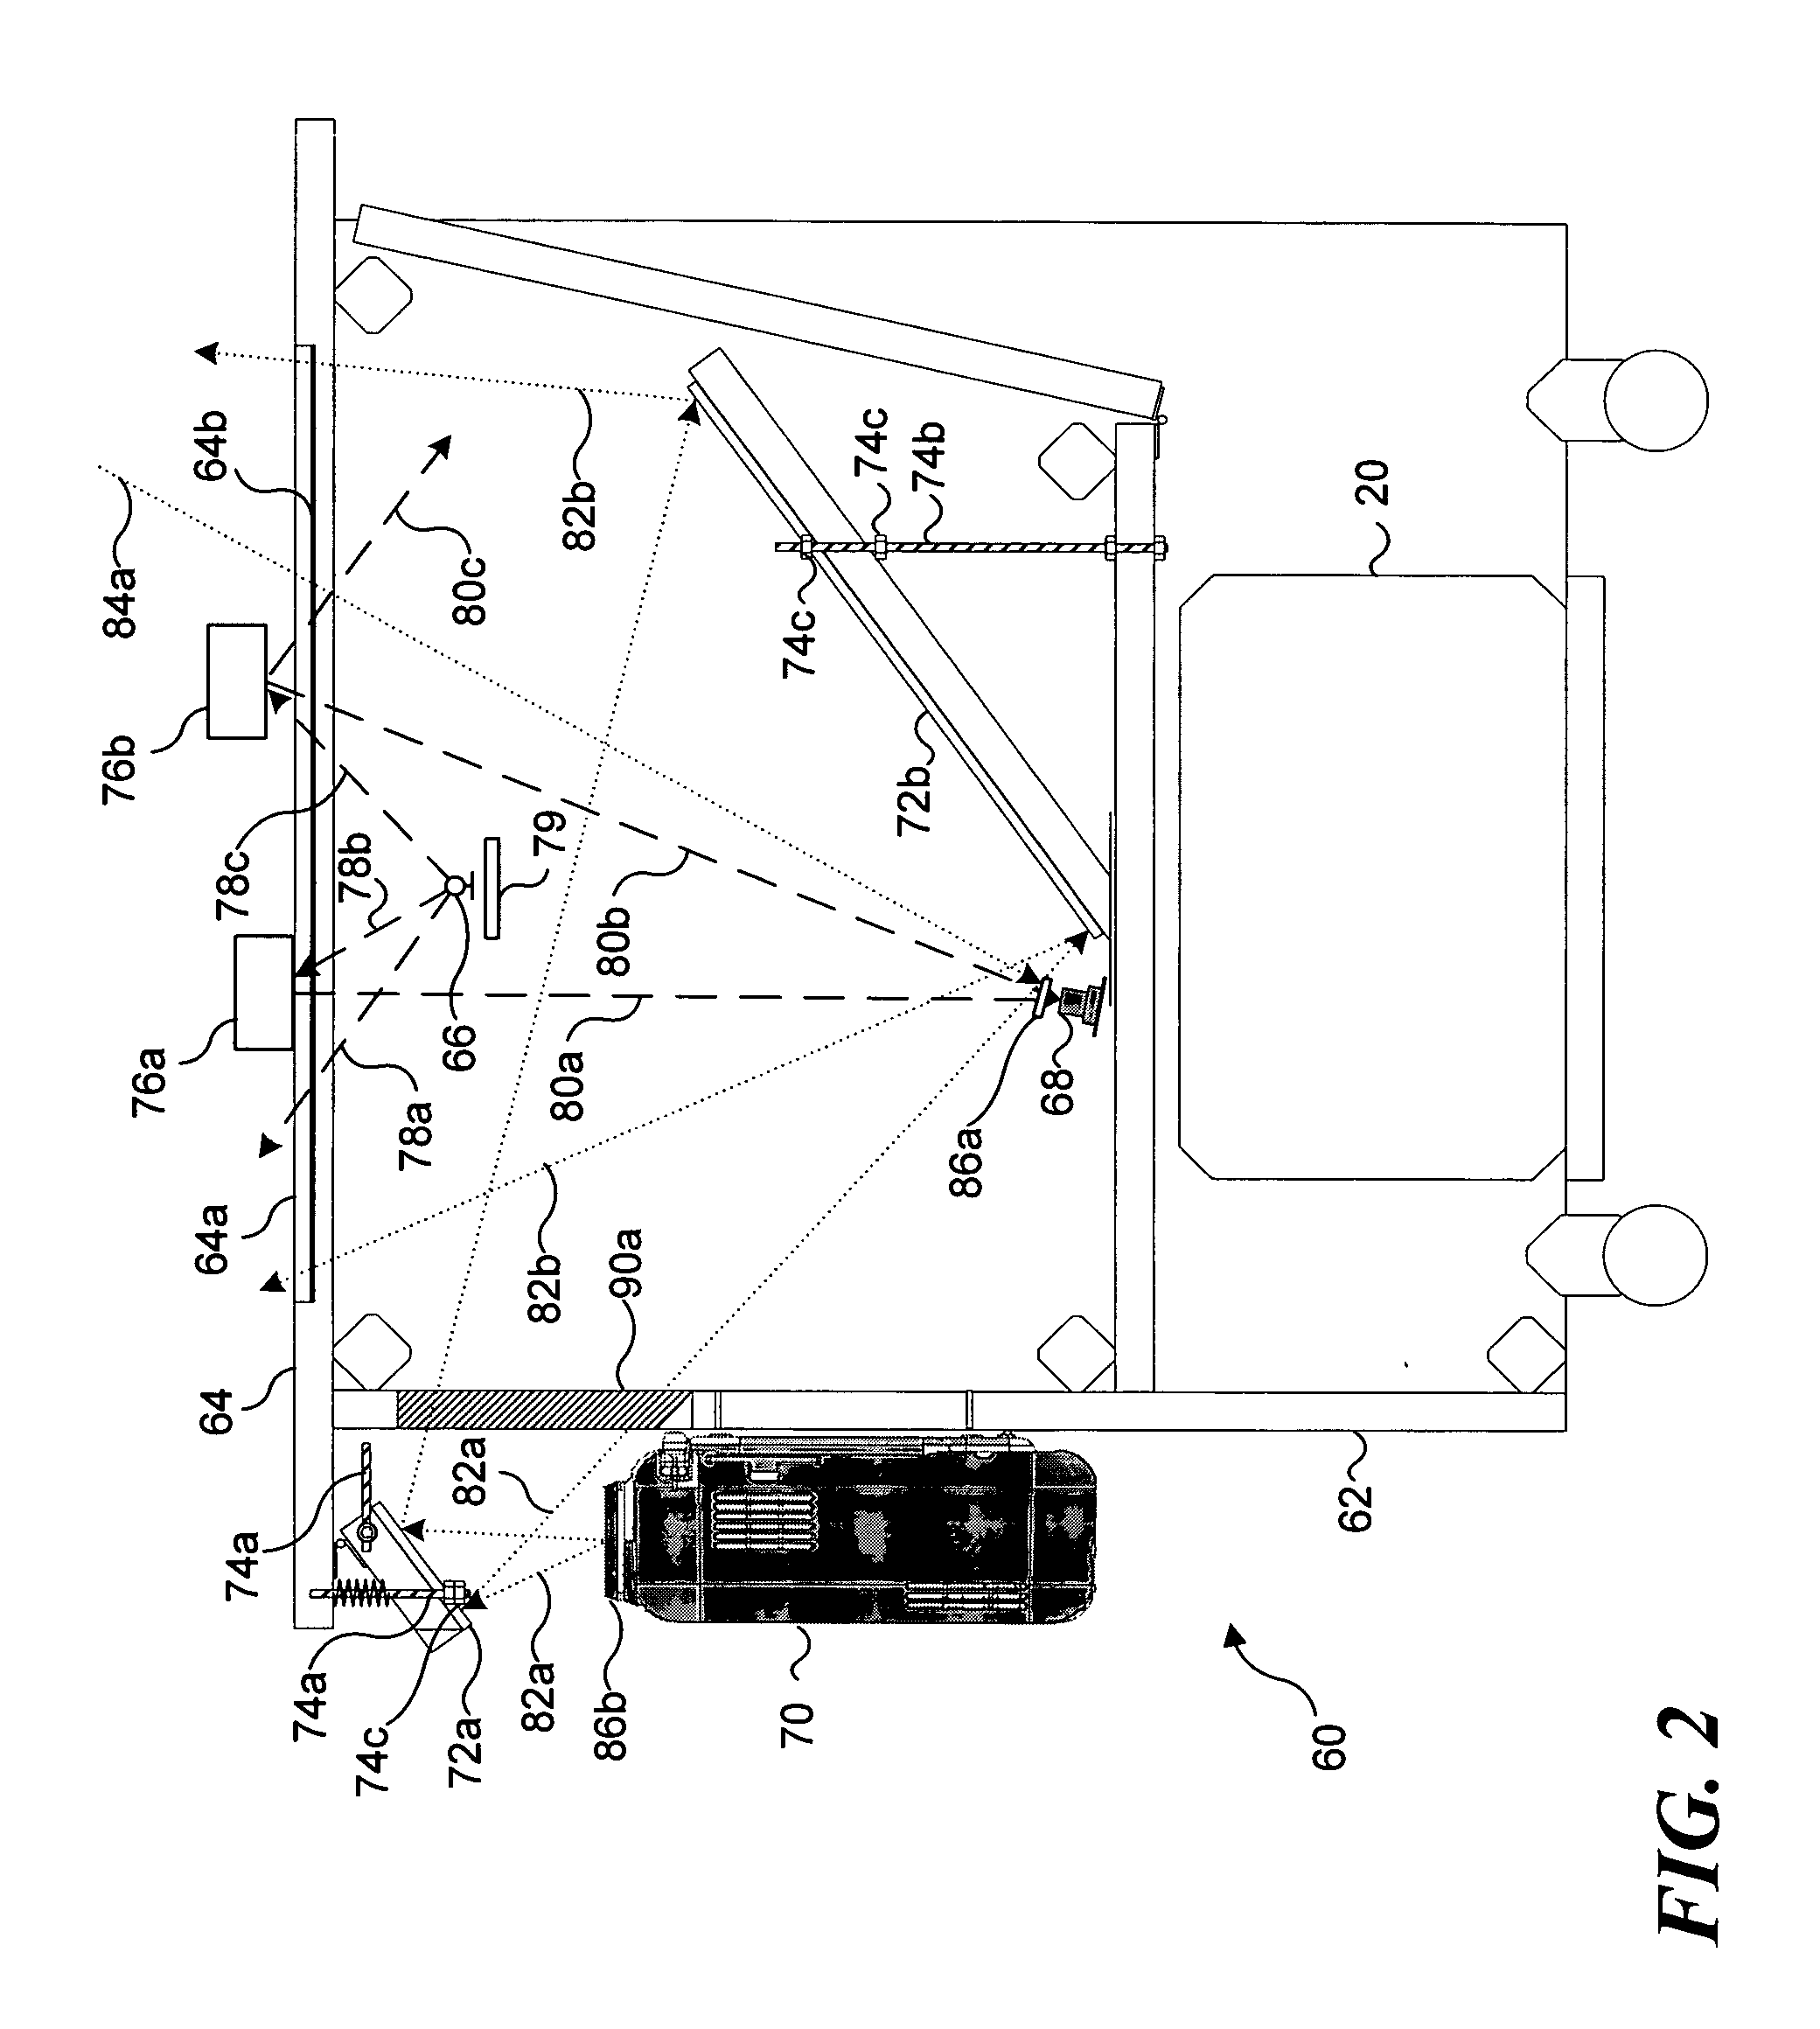 Calibration of an interactive display system